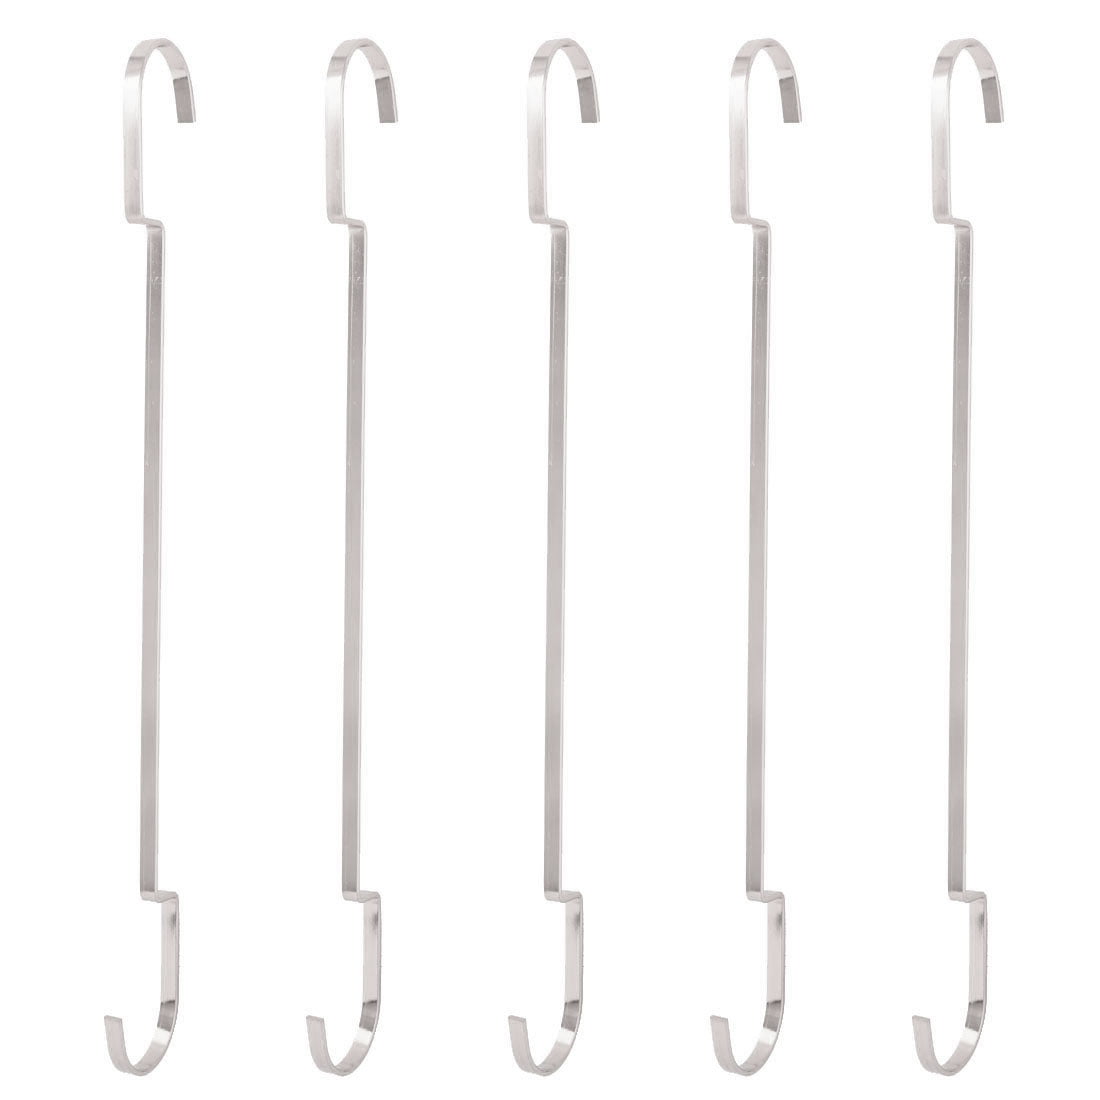 metal non-slip rubber coated with chrome clips Famy.shop children/’s clothes hanger with trouser clamp pack of 10,/ approximately 20 cm x 11.5/ cm